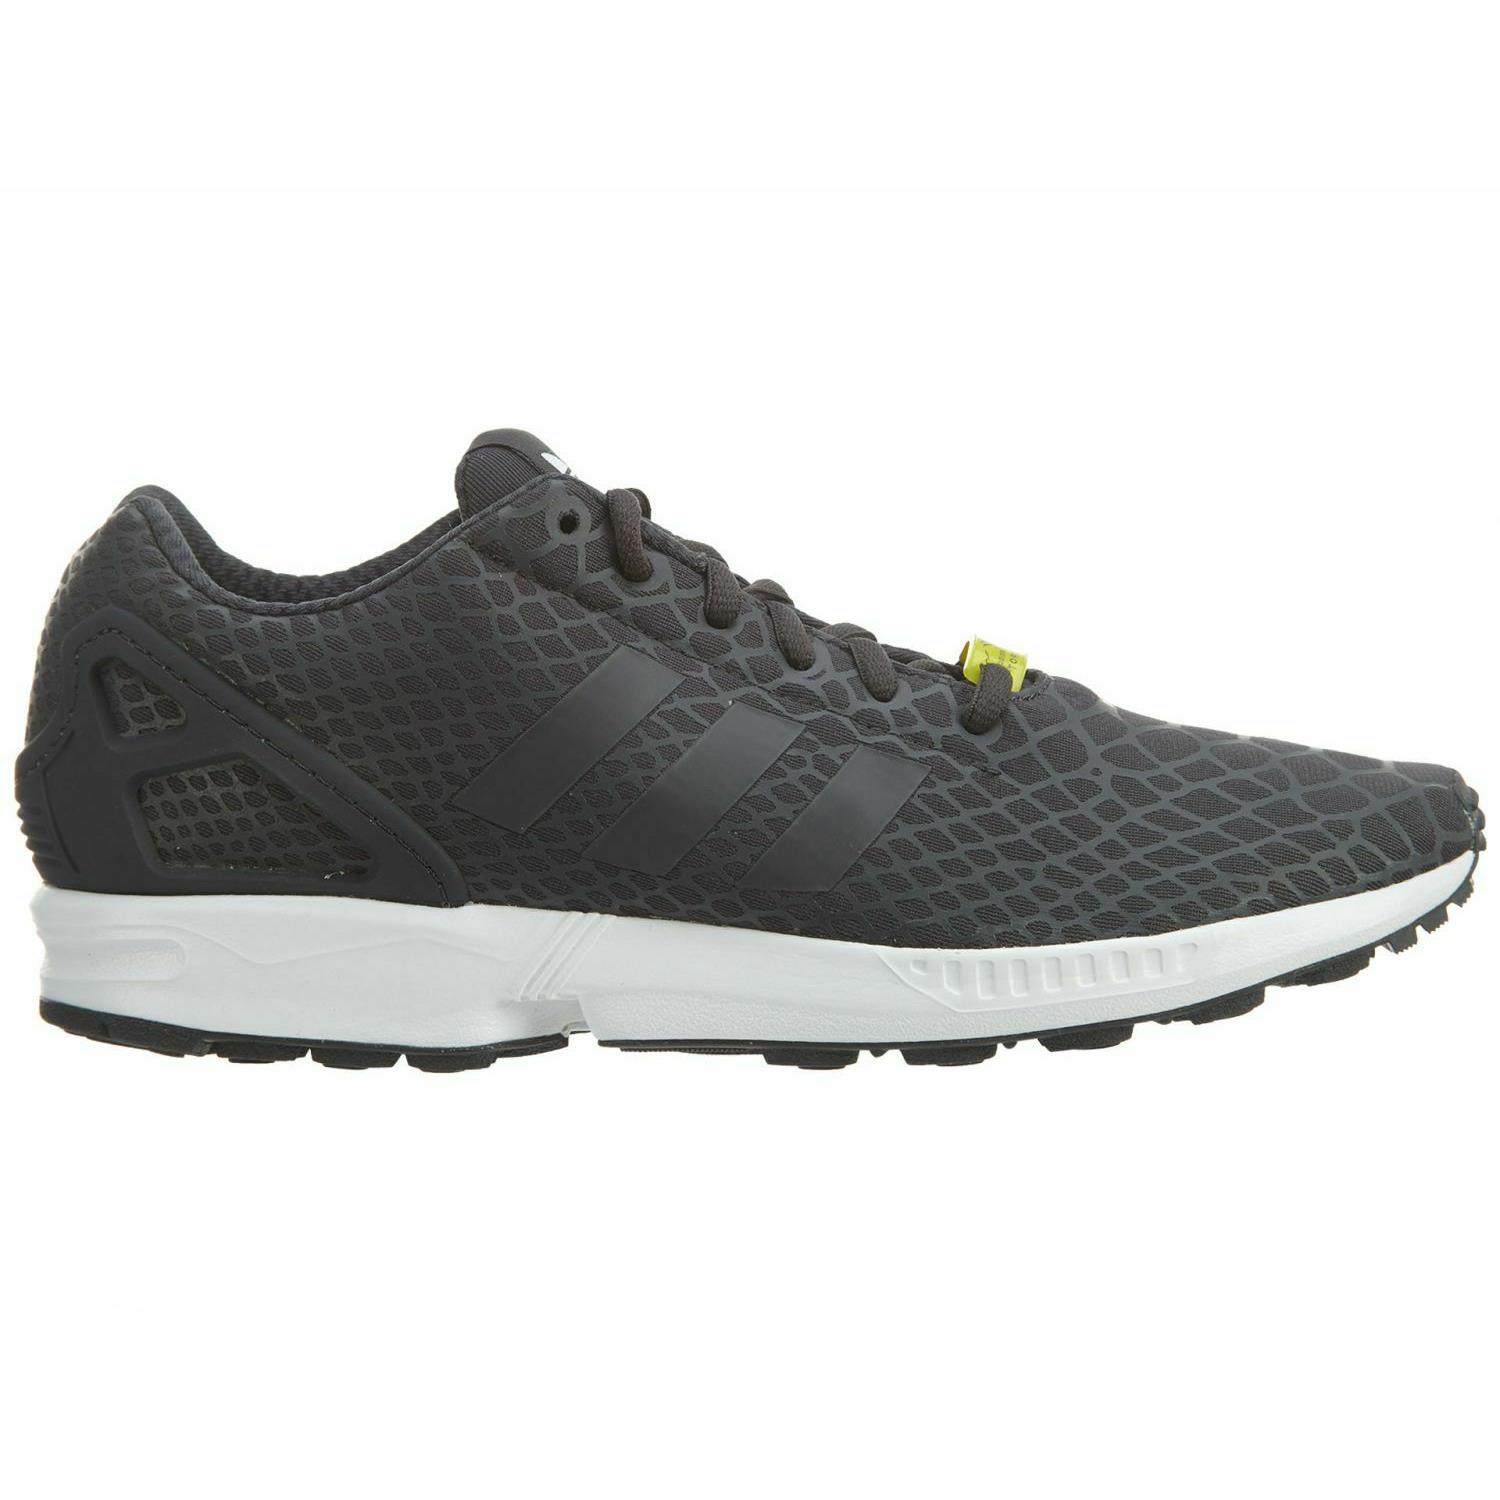 Adidas ZX Flux Techfit Mens S75488 Shadow Black White Running Shoes Size 8.5